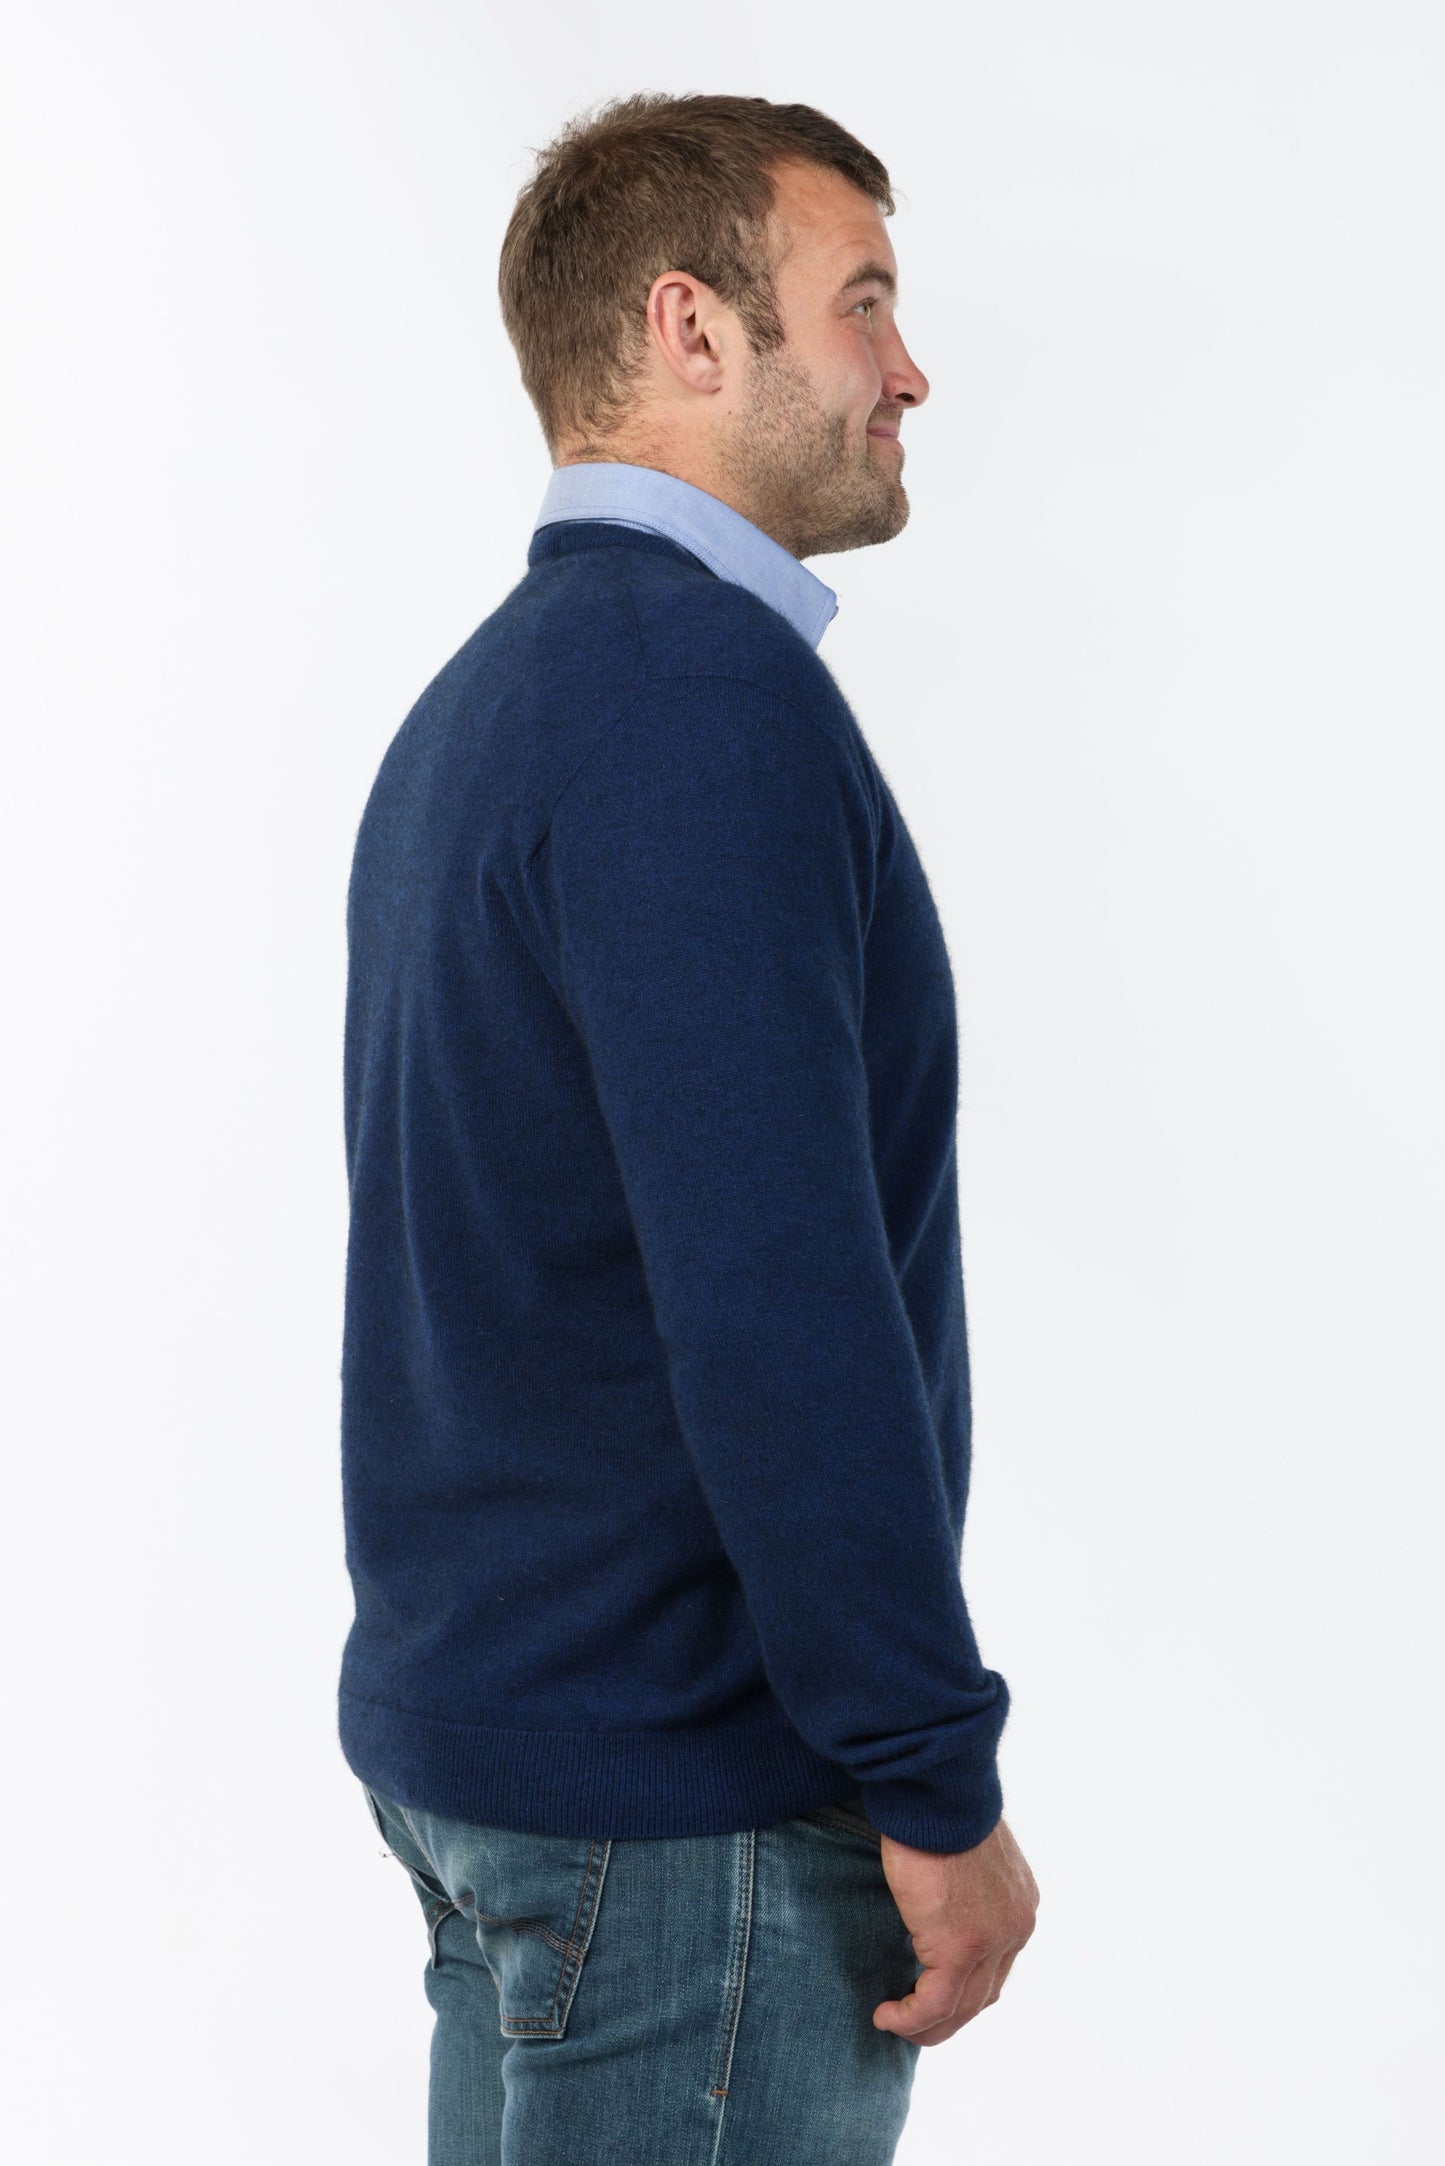 A traditional Crew Neck Jumper made in Native World's Luxury Blend of possum merino & silk. An iconic piece for any man's wardrobe. Dress up or down for any occasion. A regular fit available in sizes S - 3XL. Made at Manawatu Knitting Mills, Palmerston North, NZ. Cosmic